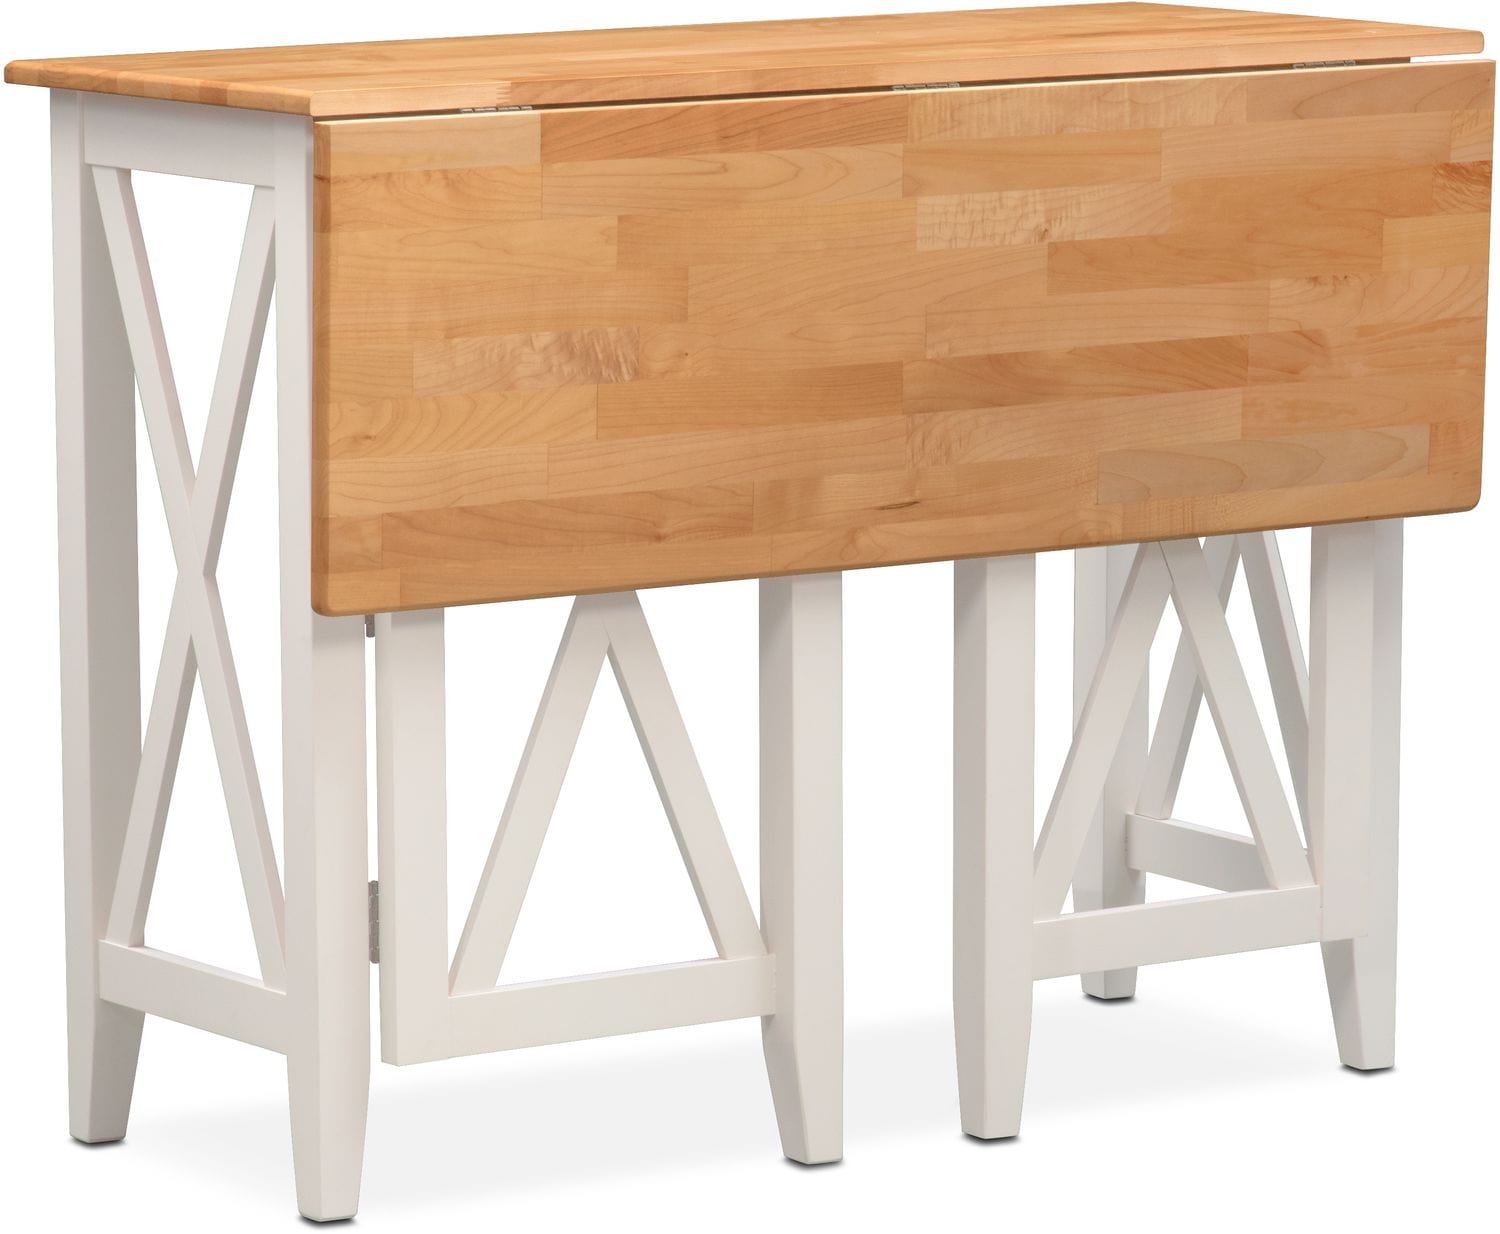 Nantucket Breakfast Bar Maple And White Value City Furniture